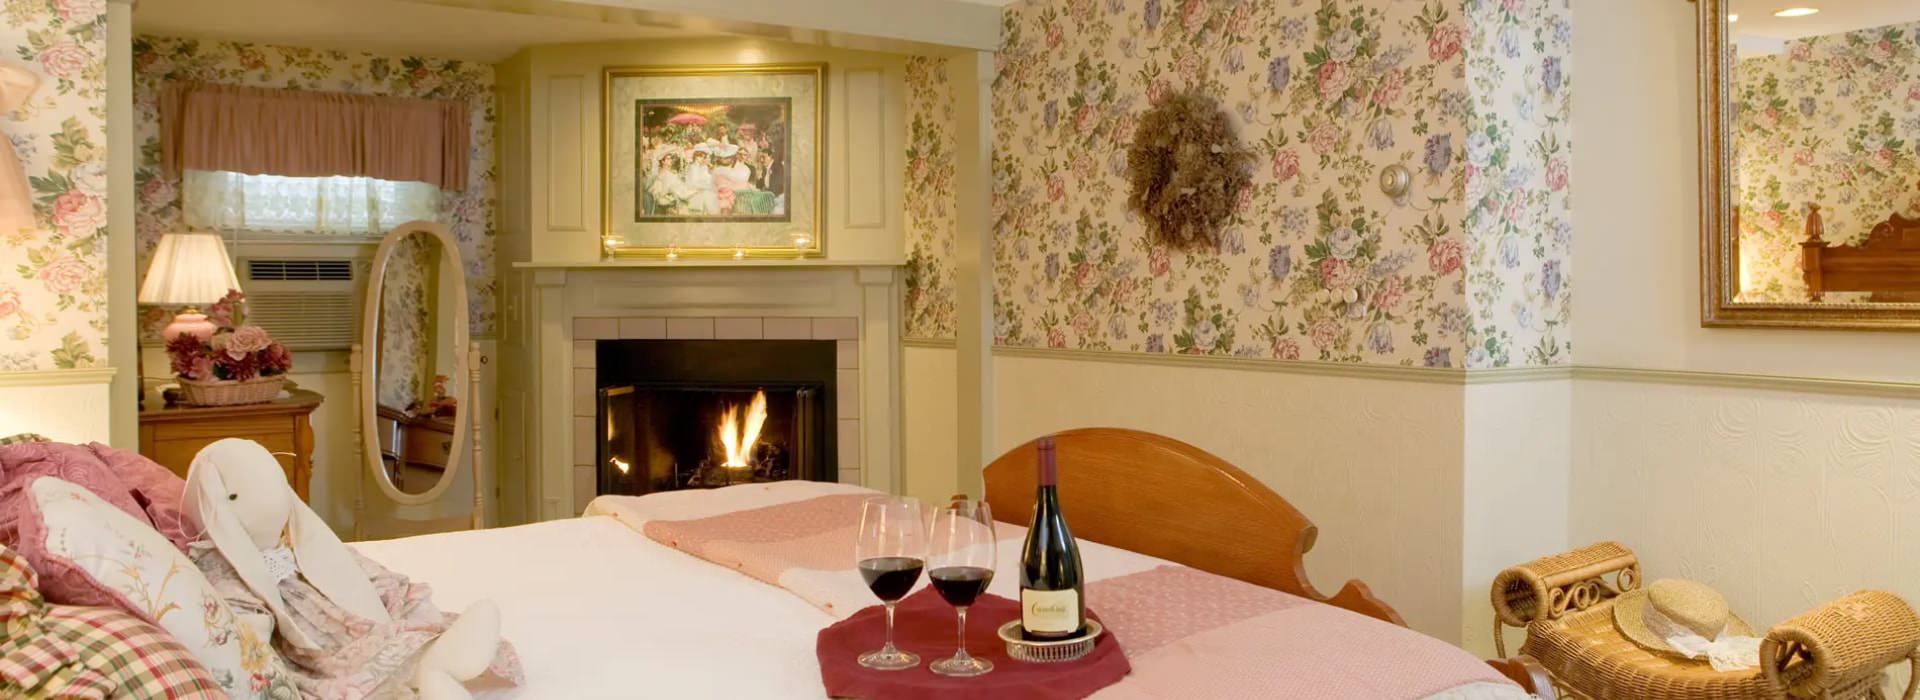 Bedroom with floral wallpaper, light-colored wall below chair rail, wooden bed with white bedding, and fireplace